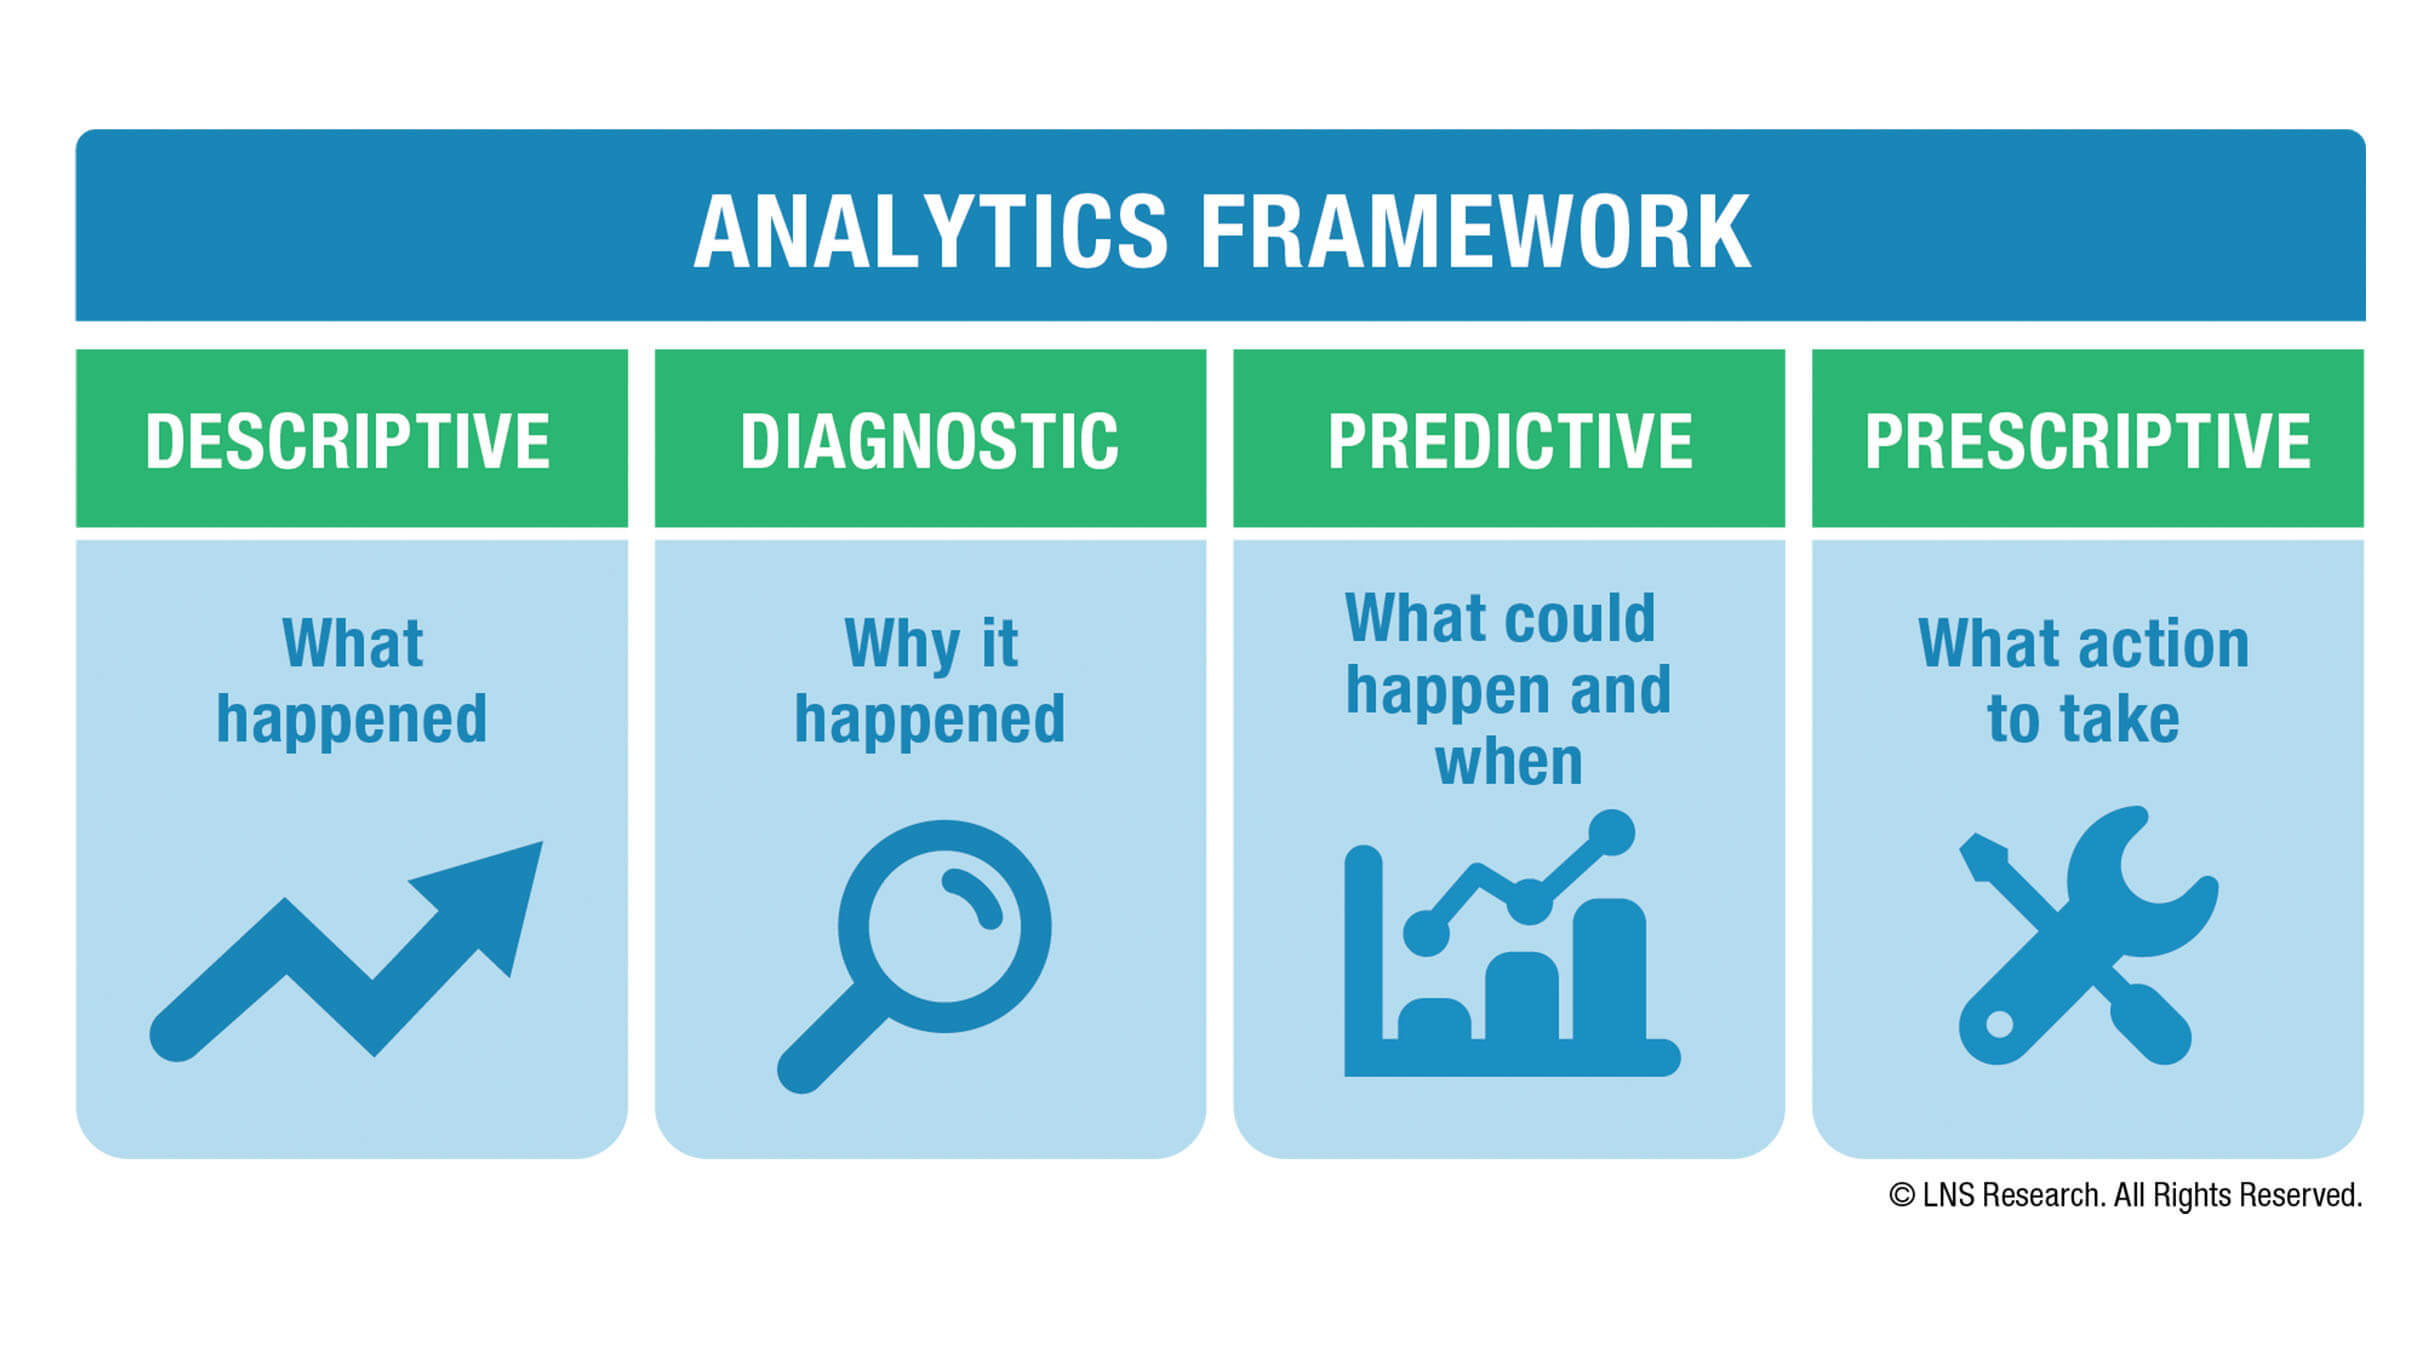 LNS Research | Analytics for Industry | FrameworkLNS Research | Analytics for Industry | Framework